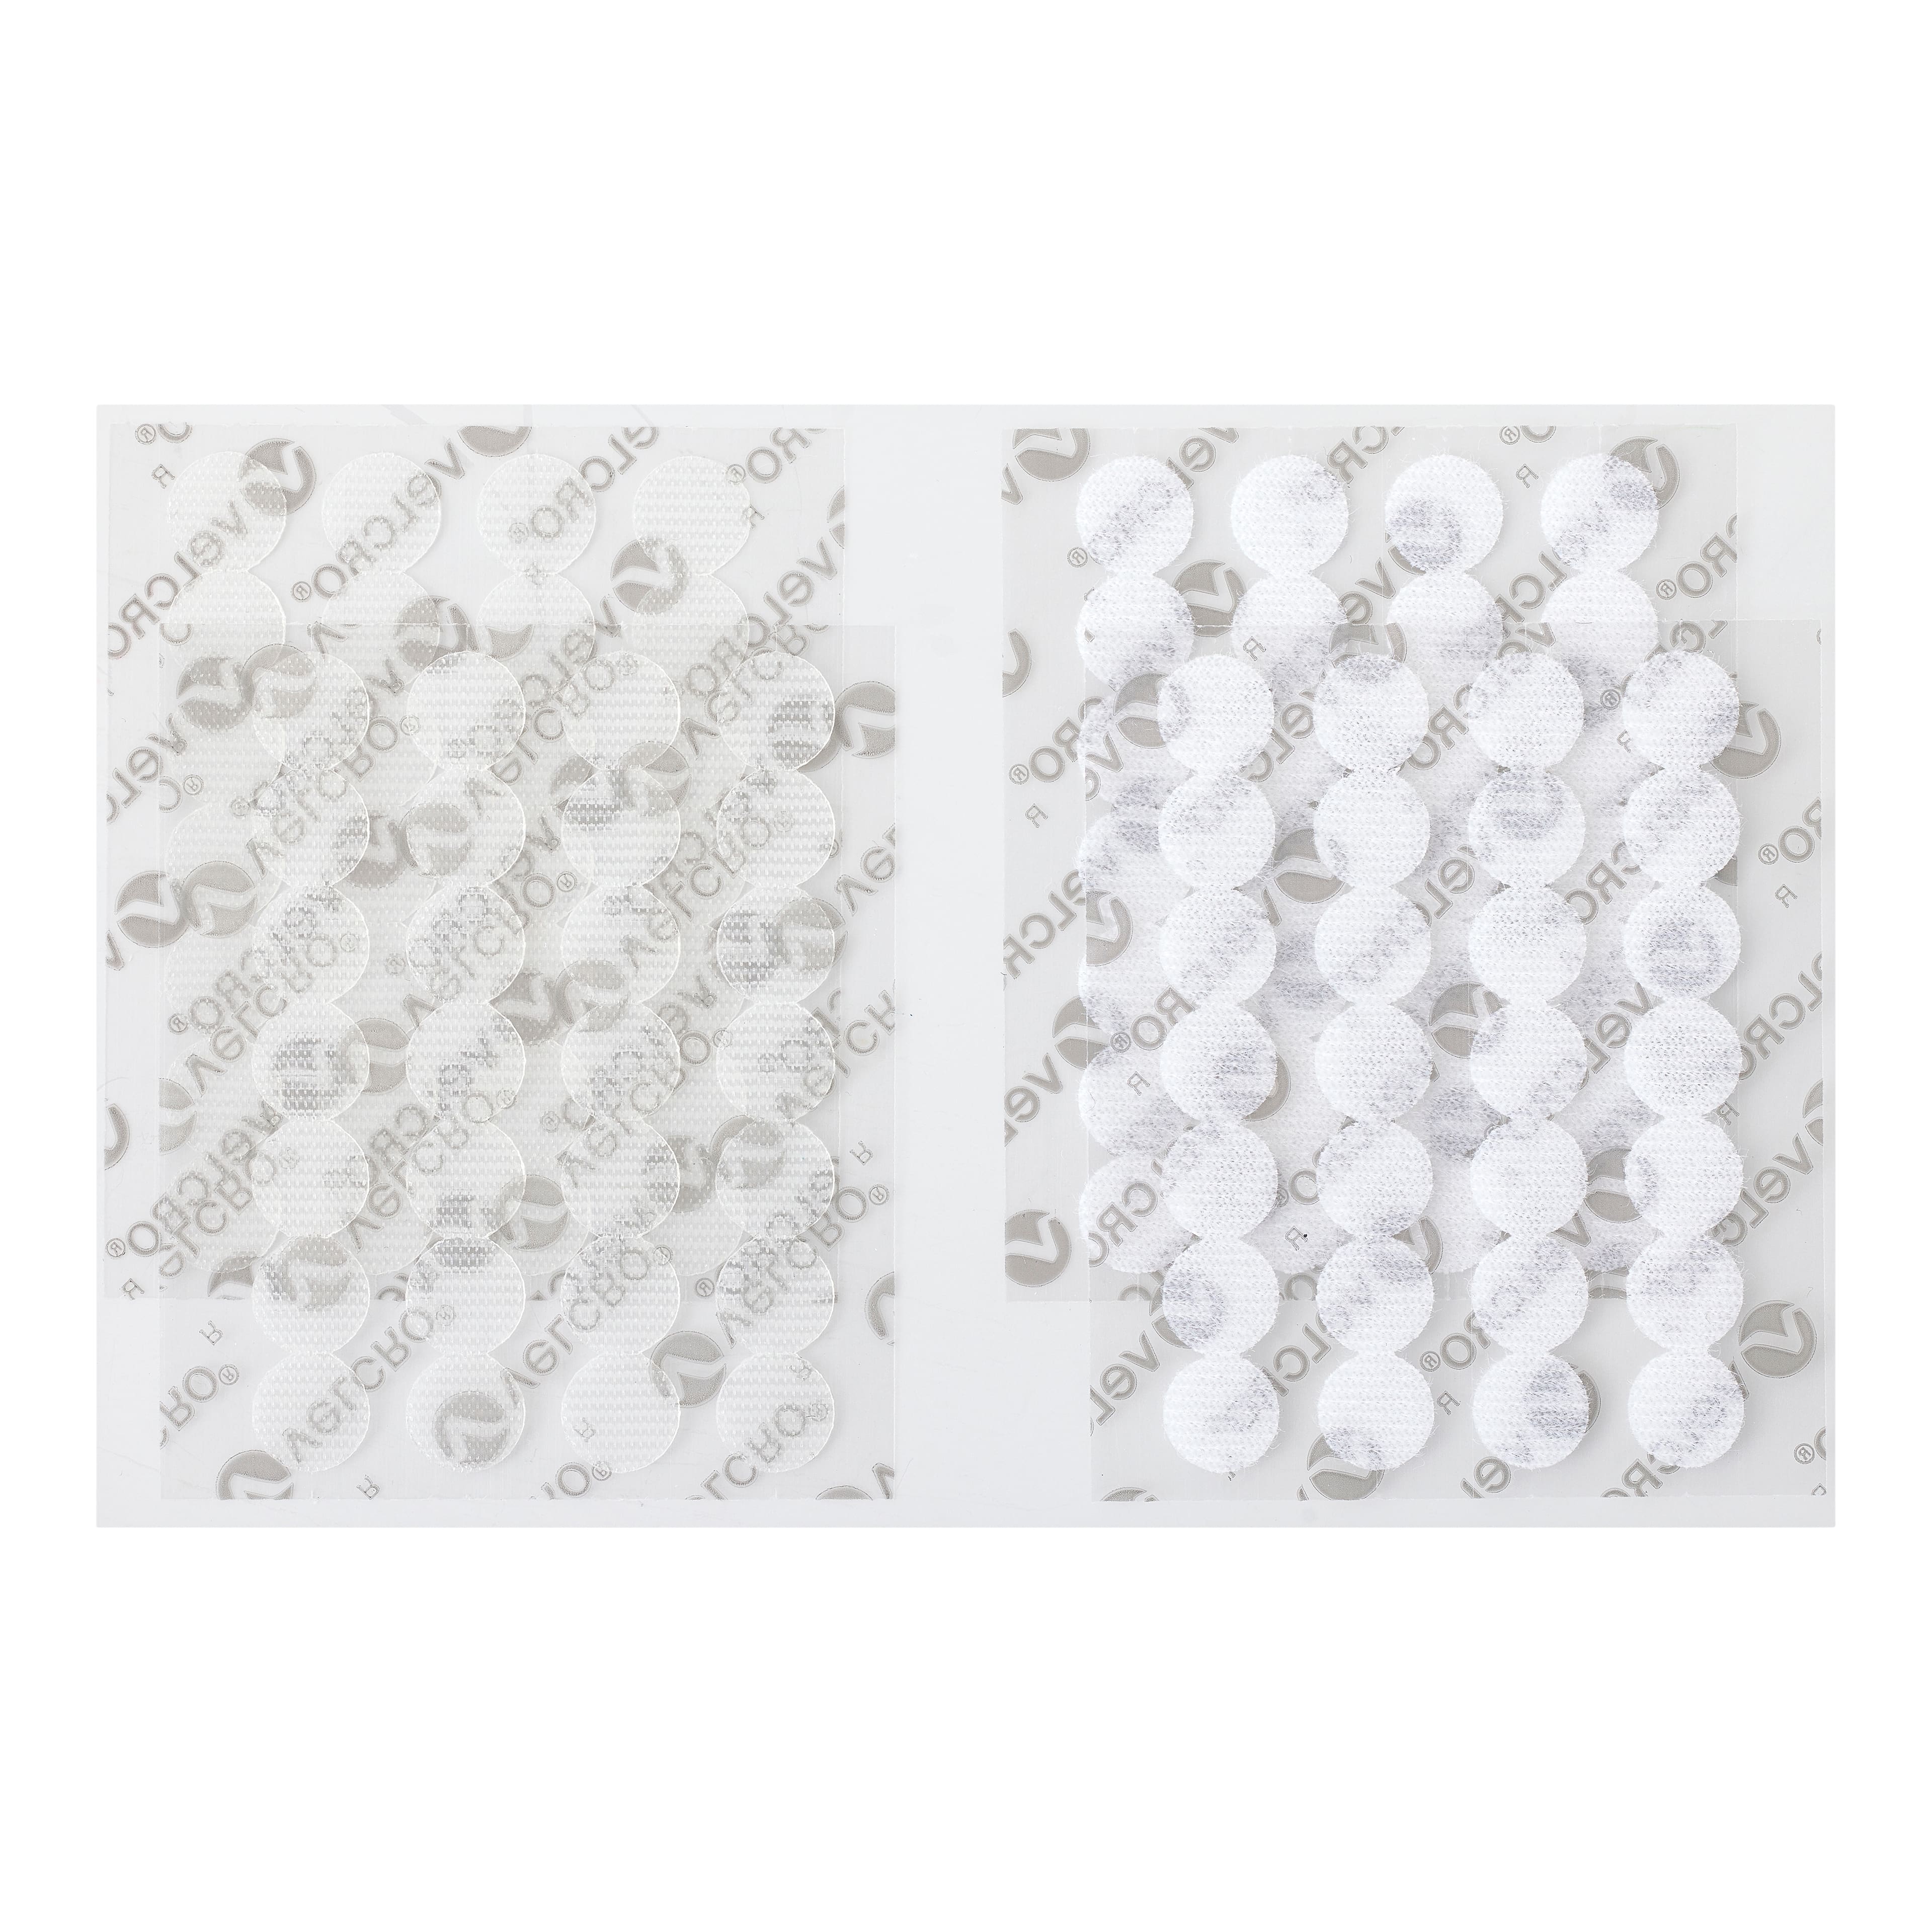 12 Packs: 56 ct. (672 total) VELCRO&#xAE; Brand Thin Clear Fasteners